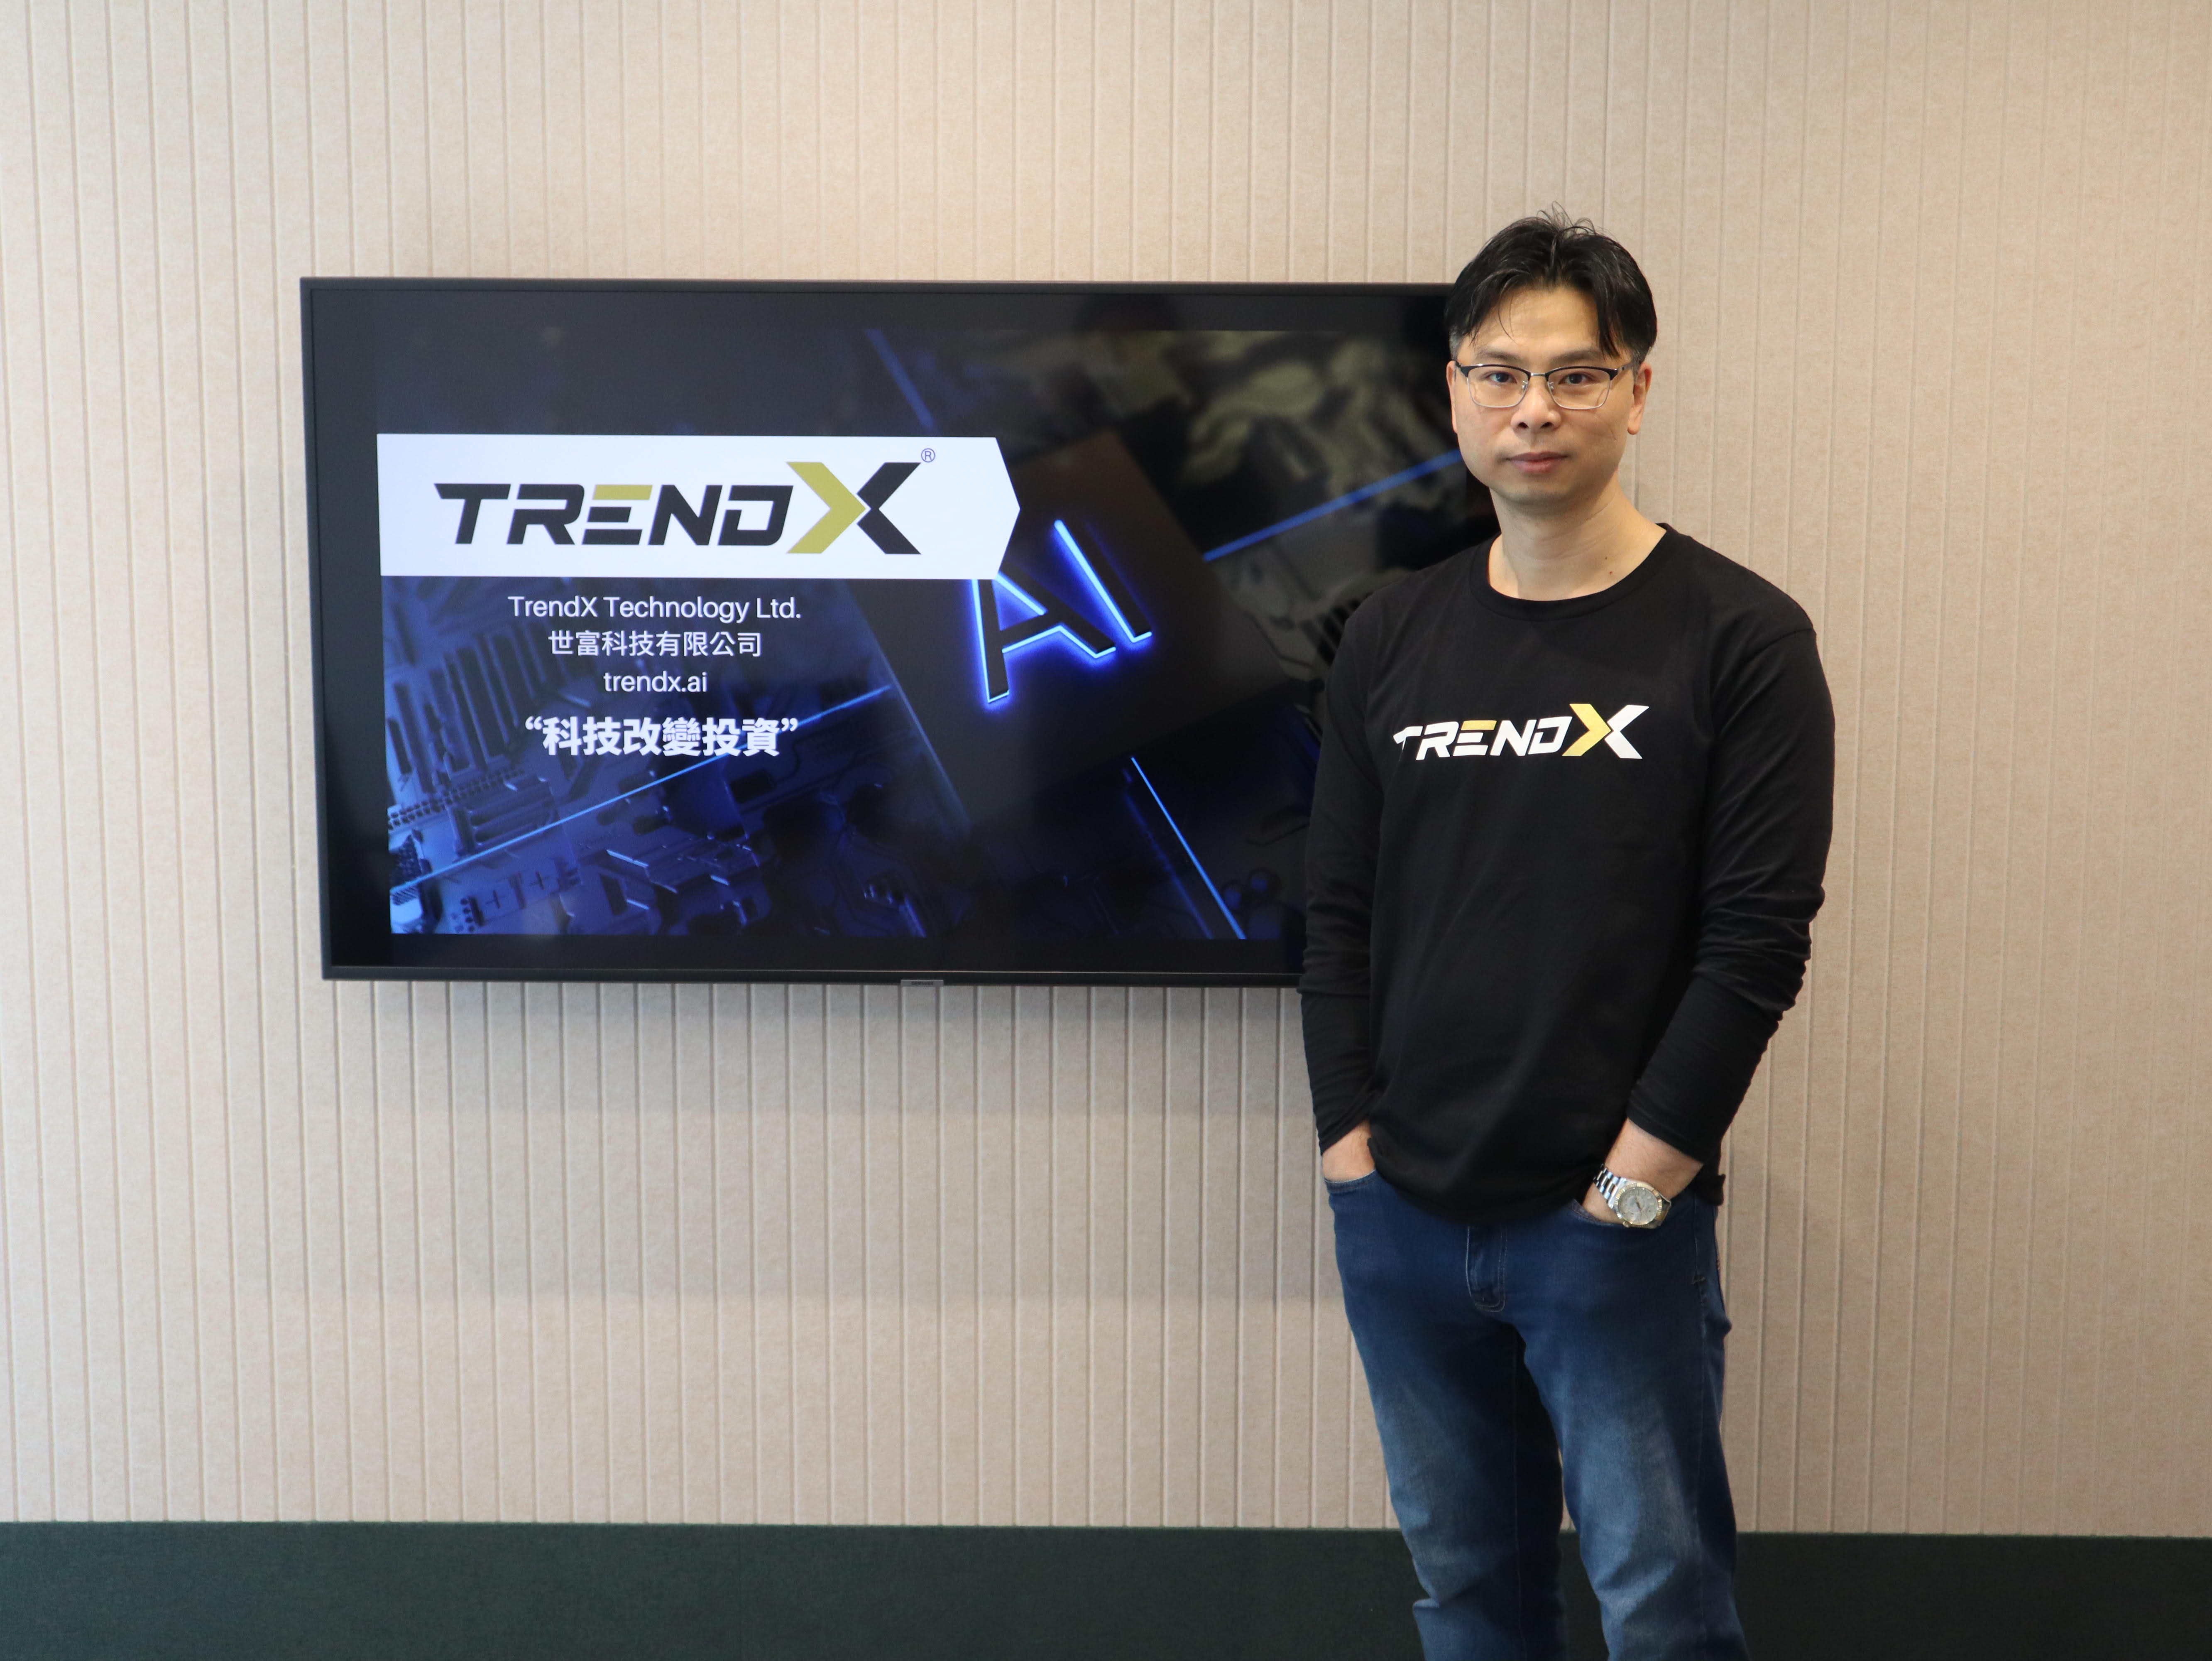 Philip Cheung, Co-Founder and Chief Technology Director of TrendX